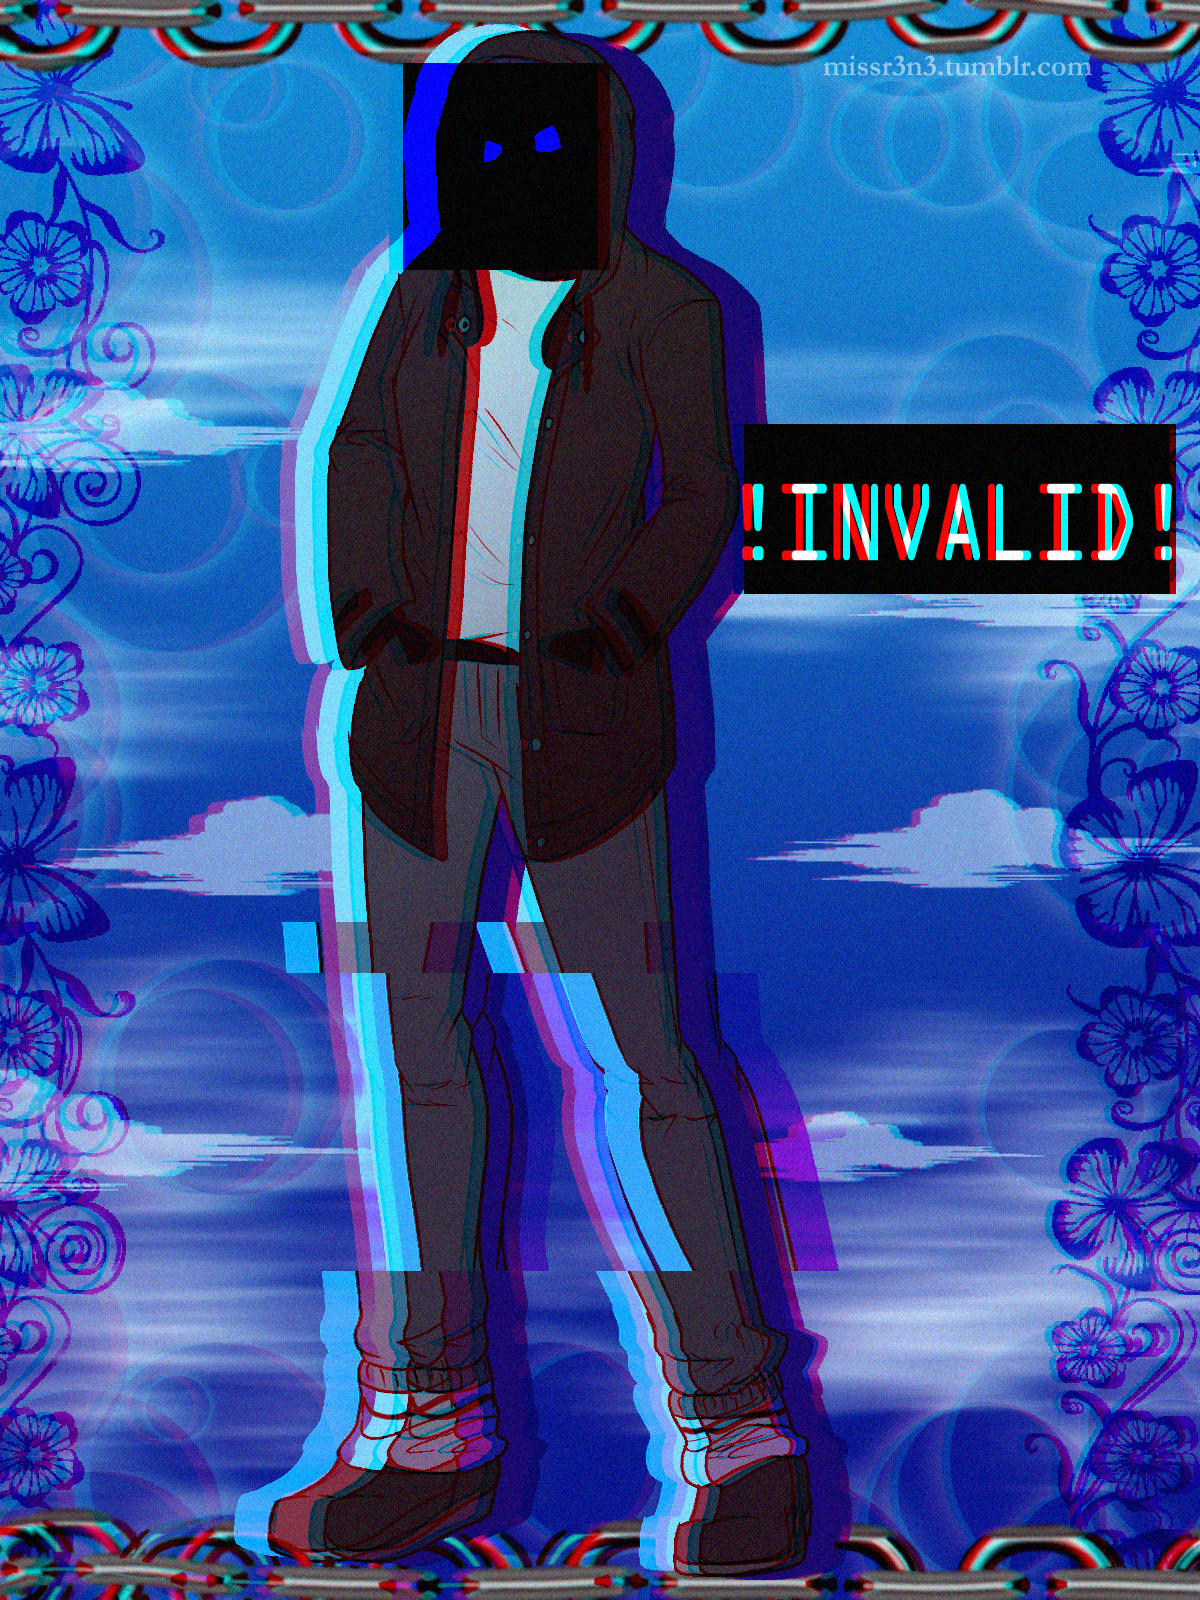 a tall woman with her face censored, though the shape of her eyes are visible through the black square. the background is blue and sky-themed, with a y2k art style. her name is also censored. text over the censor bar reads 'INVALID'